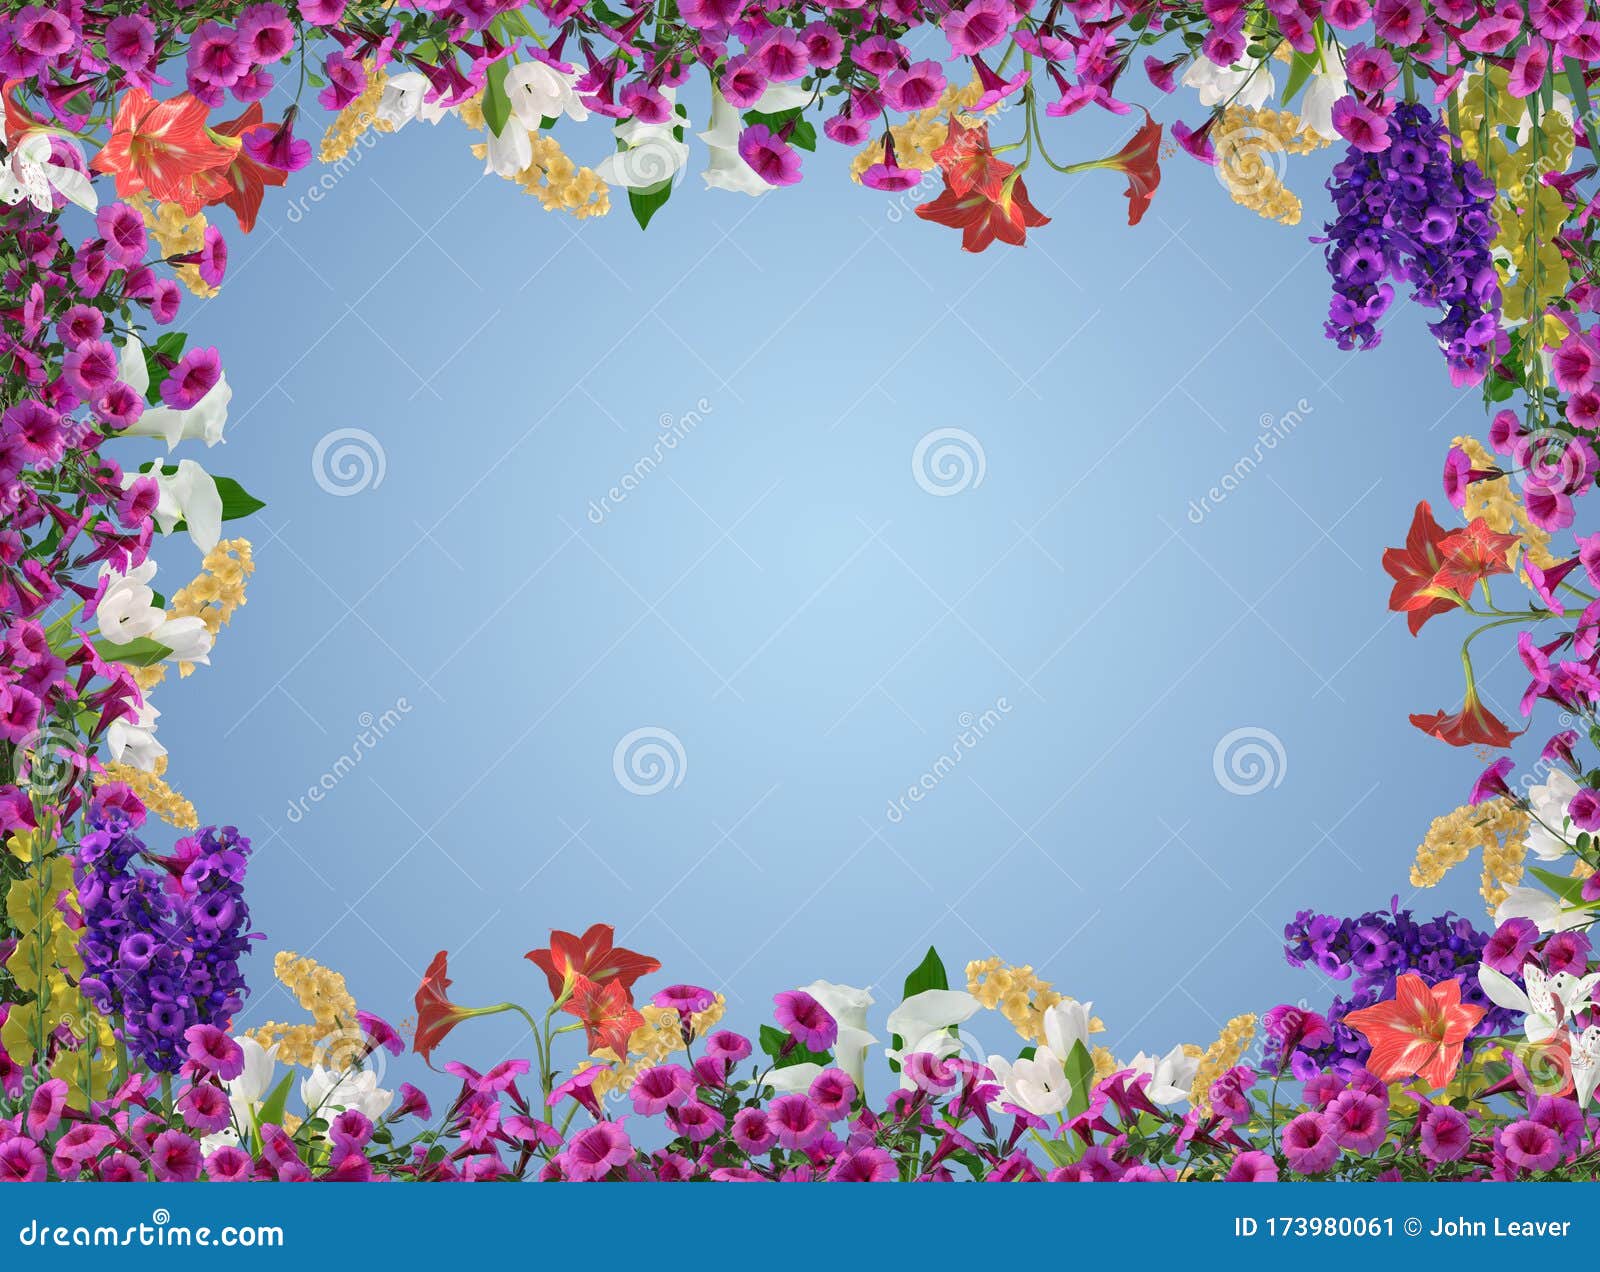 Flower Border with Blue Background Stock Image - Image of decorative,  blossom: 173980061